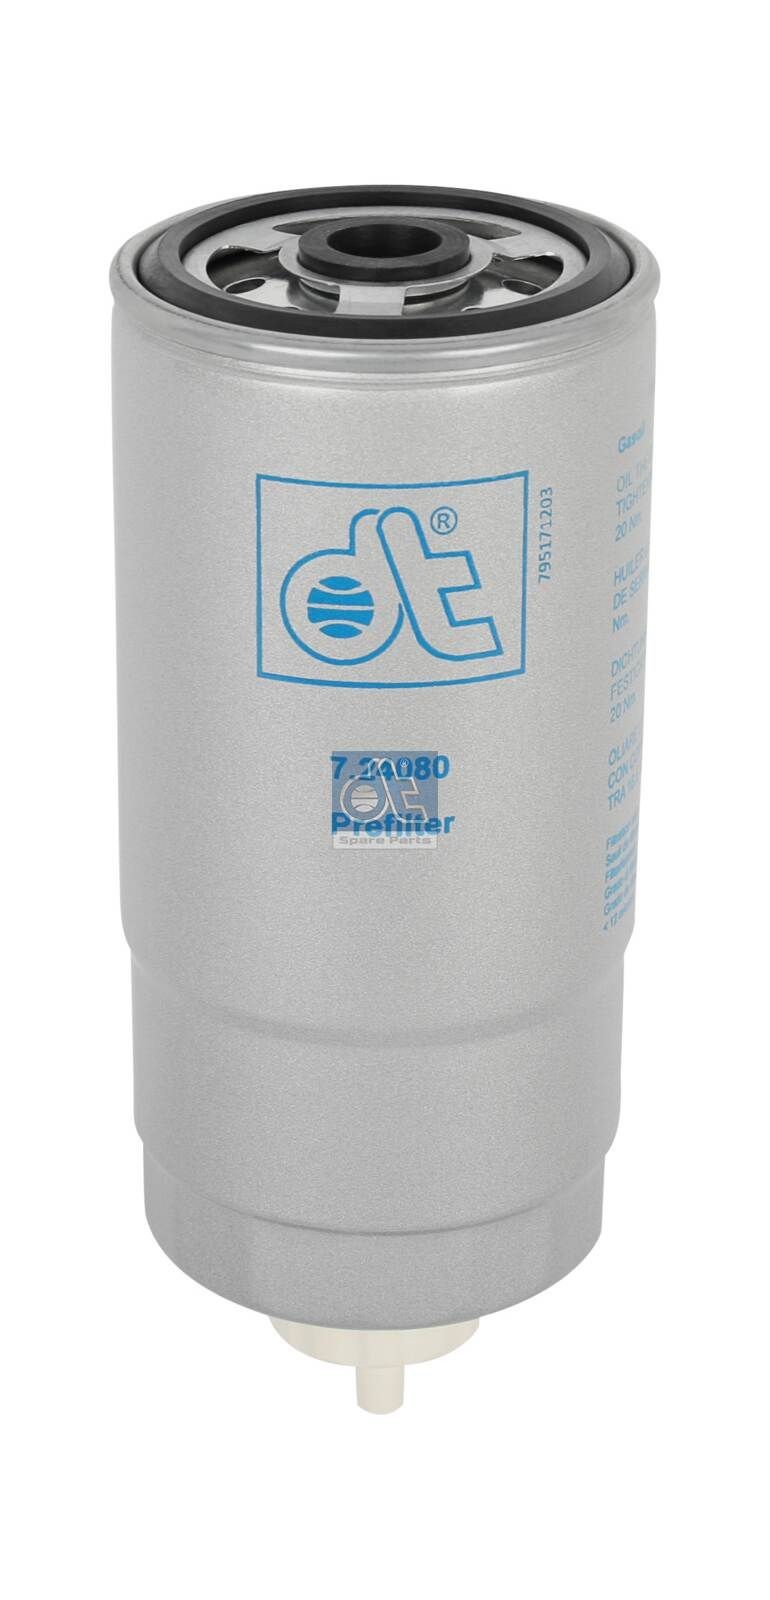 H160WK DT Spare Parts 7.24080 Fuel filter 0299 2300